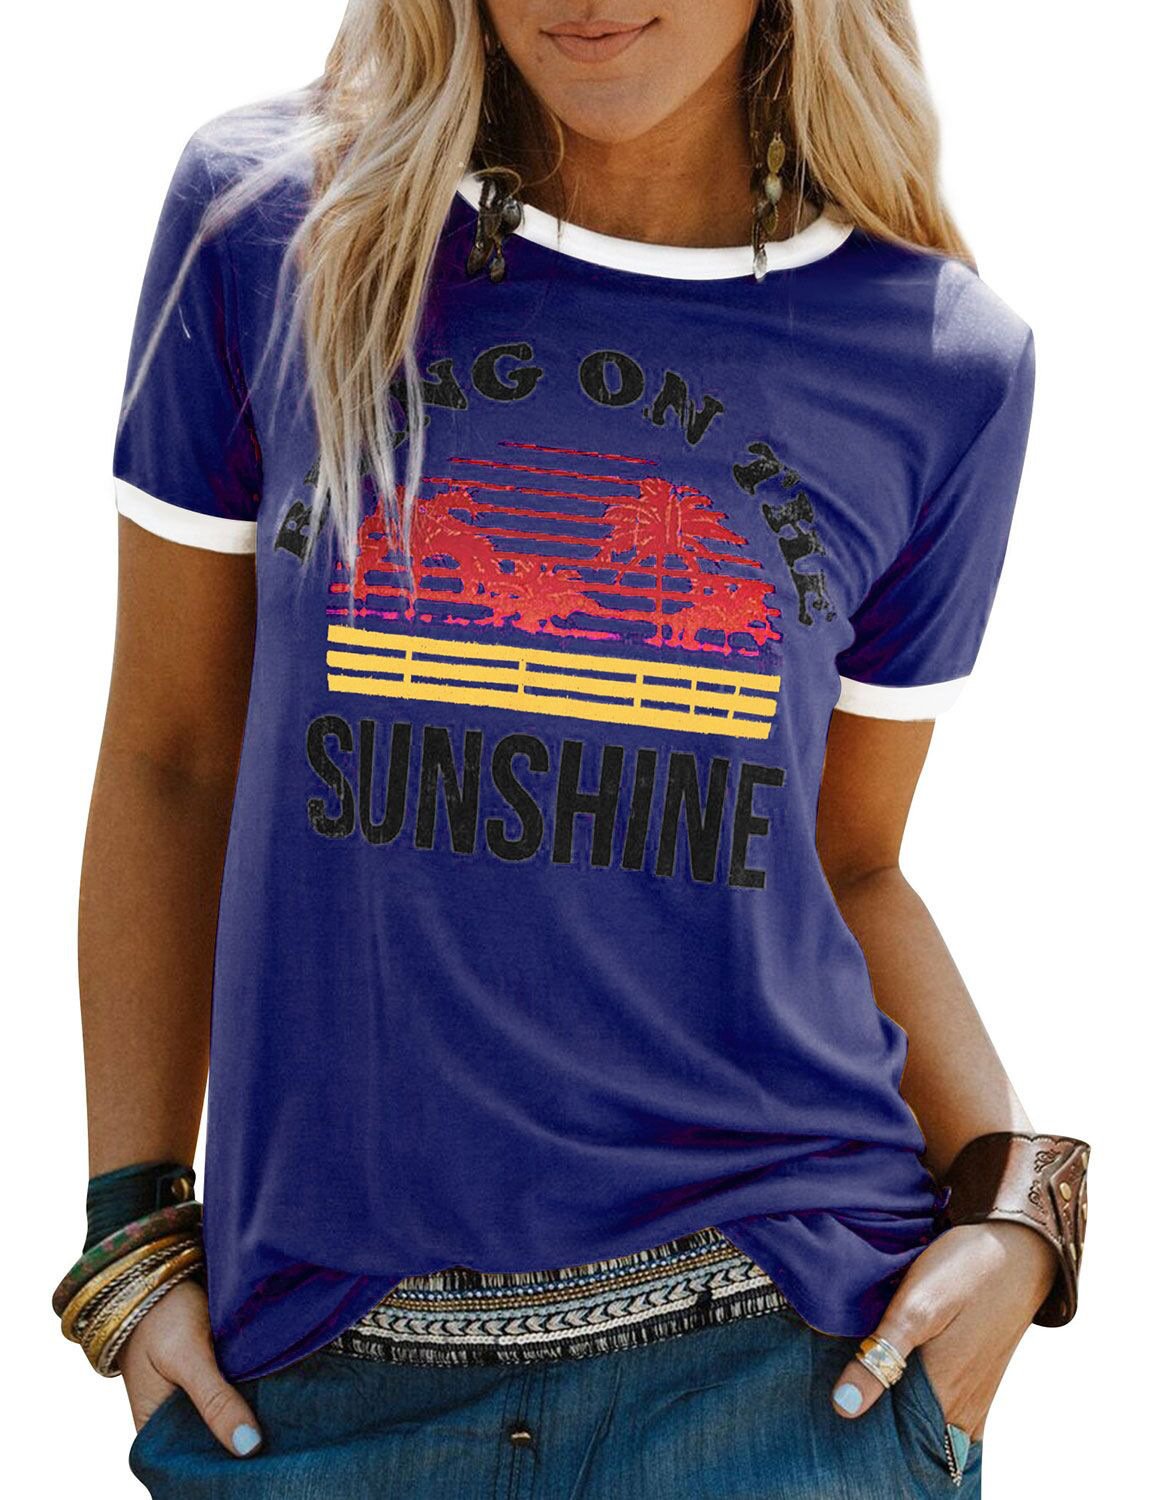 New Women's T-Shirt Bring On The Sunshine Letter Print Top